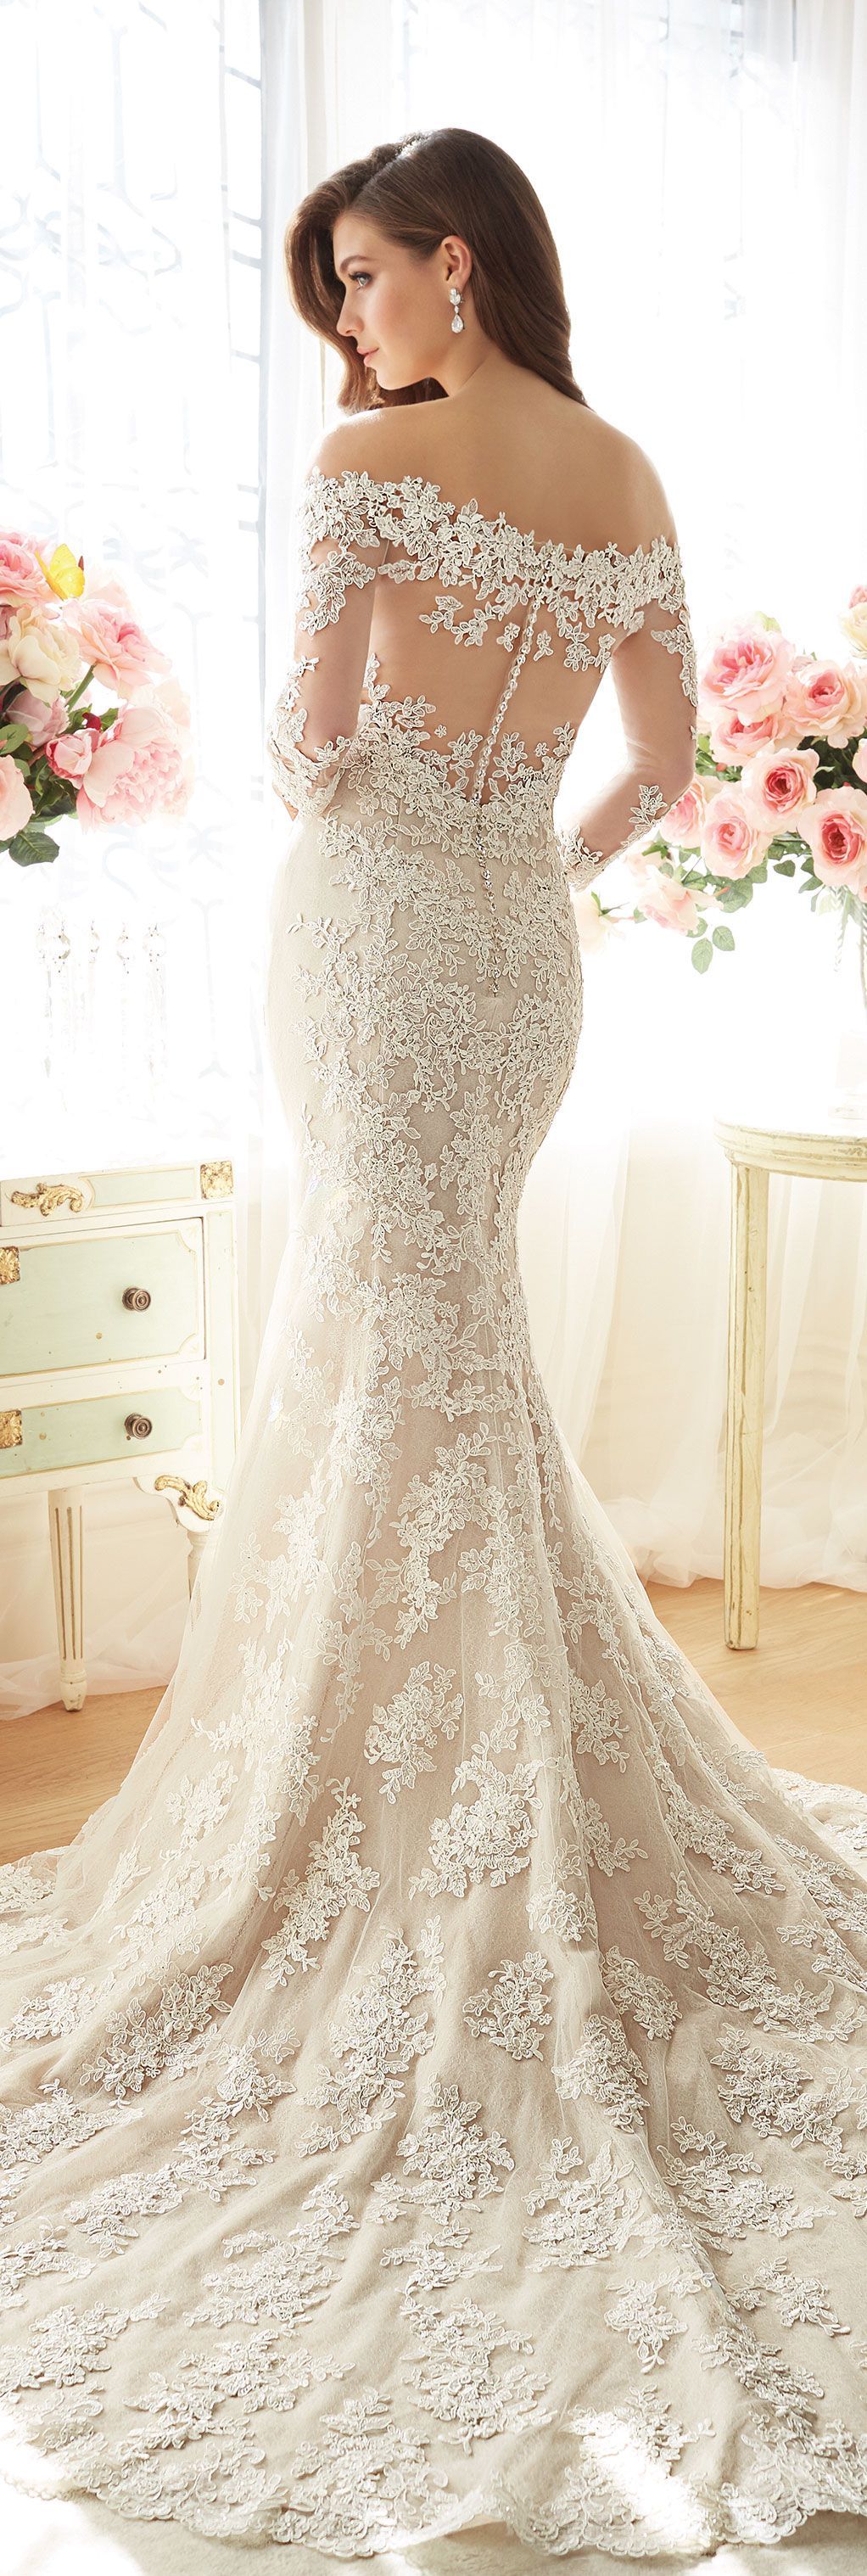 The Sophia Tolli Spring 2016 Wedding Dress Collection – Style No. Y11632 – Riona #